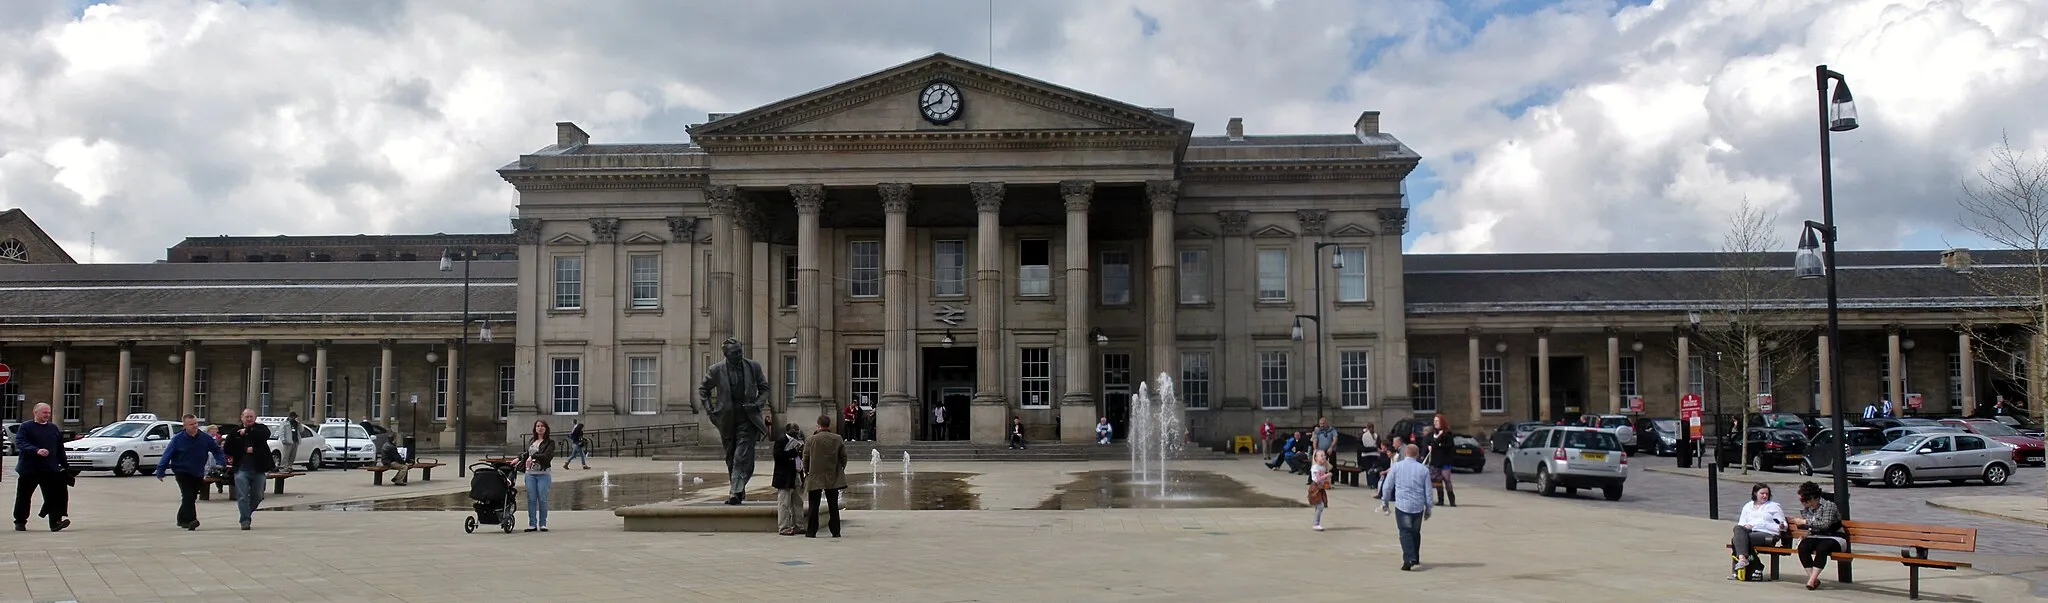 Photo showing: Huddersfield railway station in St Georges Square, A bronze statue of the late former Prime Minister of the United Kingdom Harold Wilson stands in the square before it. Wilson originated from the town.